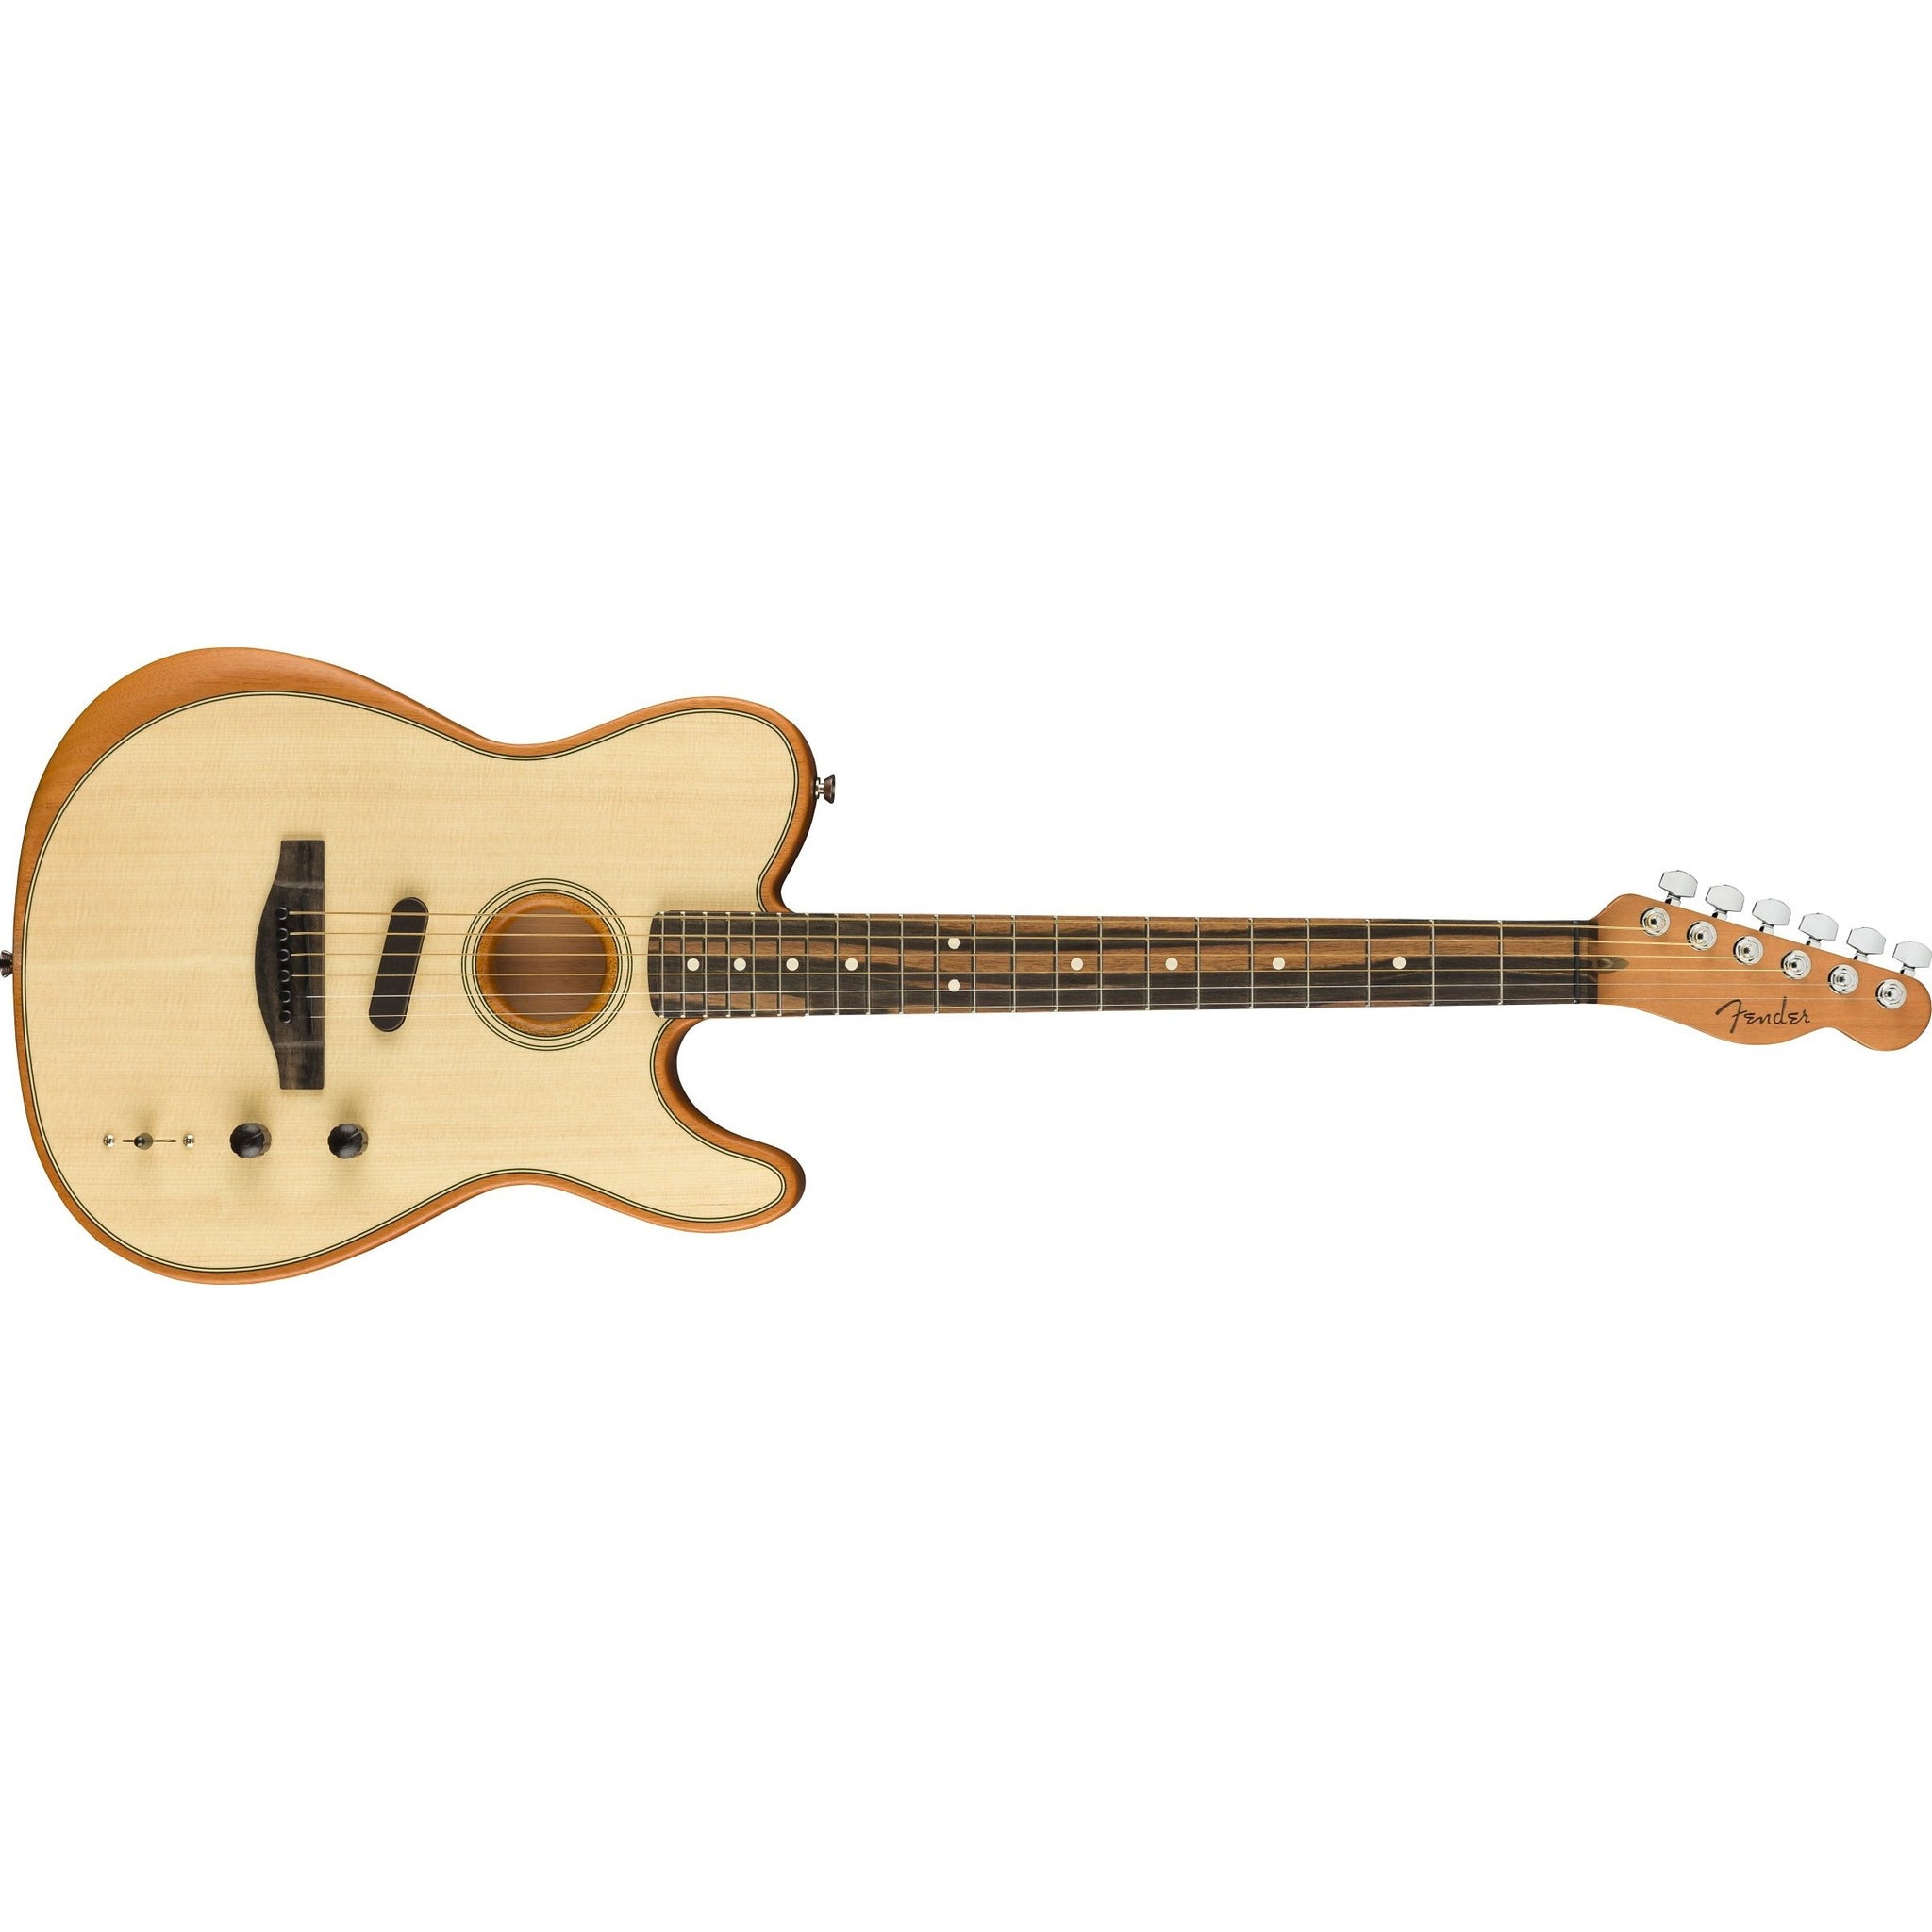 Fender American Acoustasonic Telecaster Guitar with Deluxe Gig Bag-Natural-Music World Academy